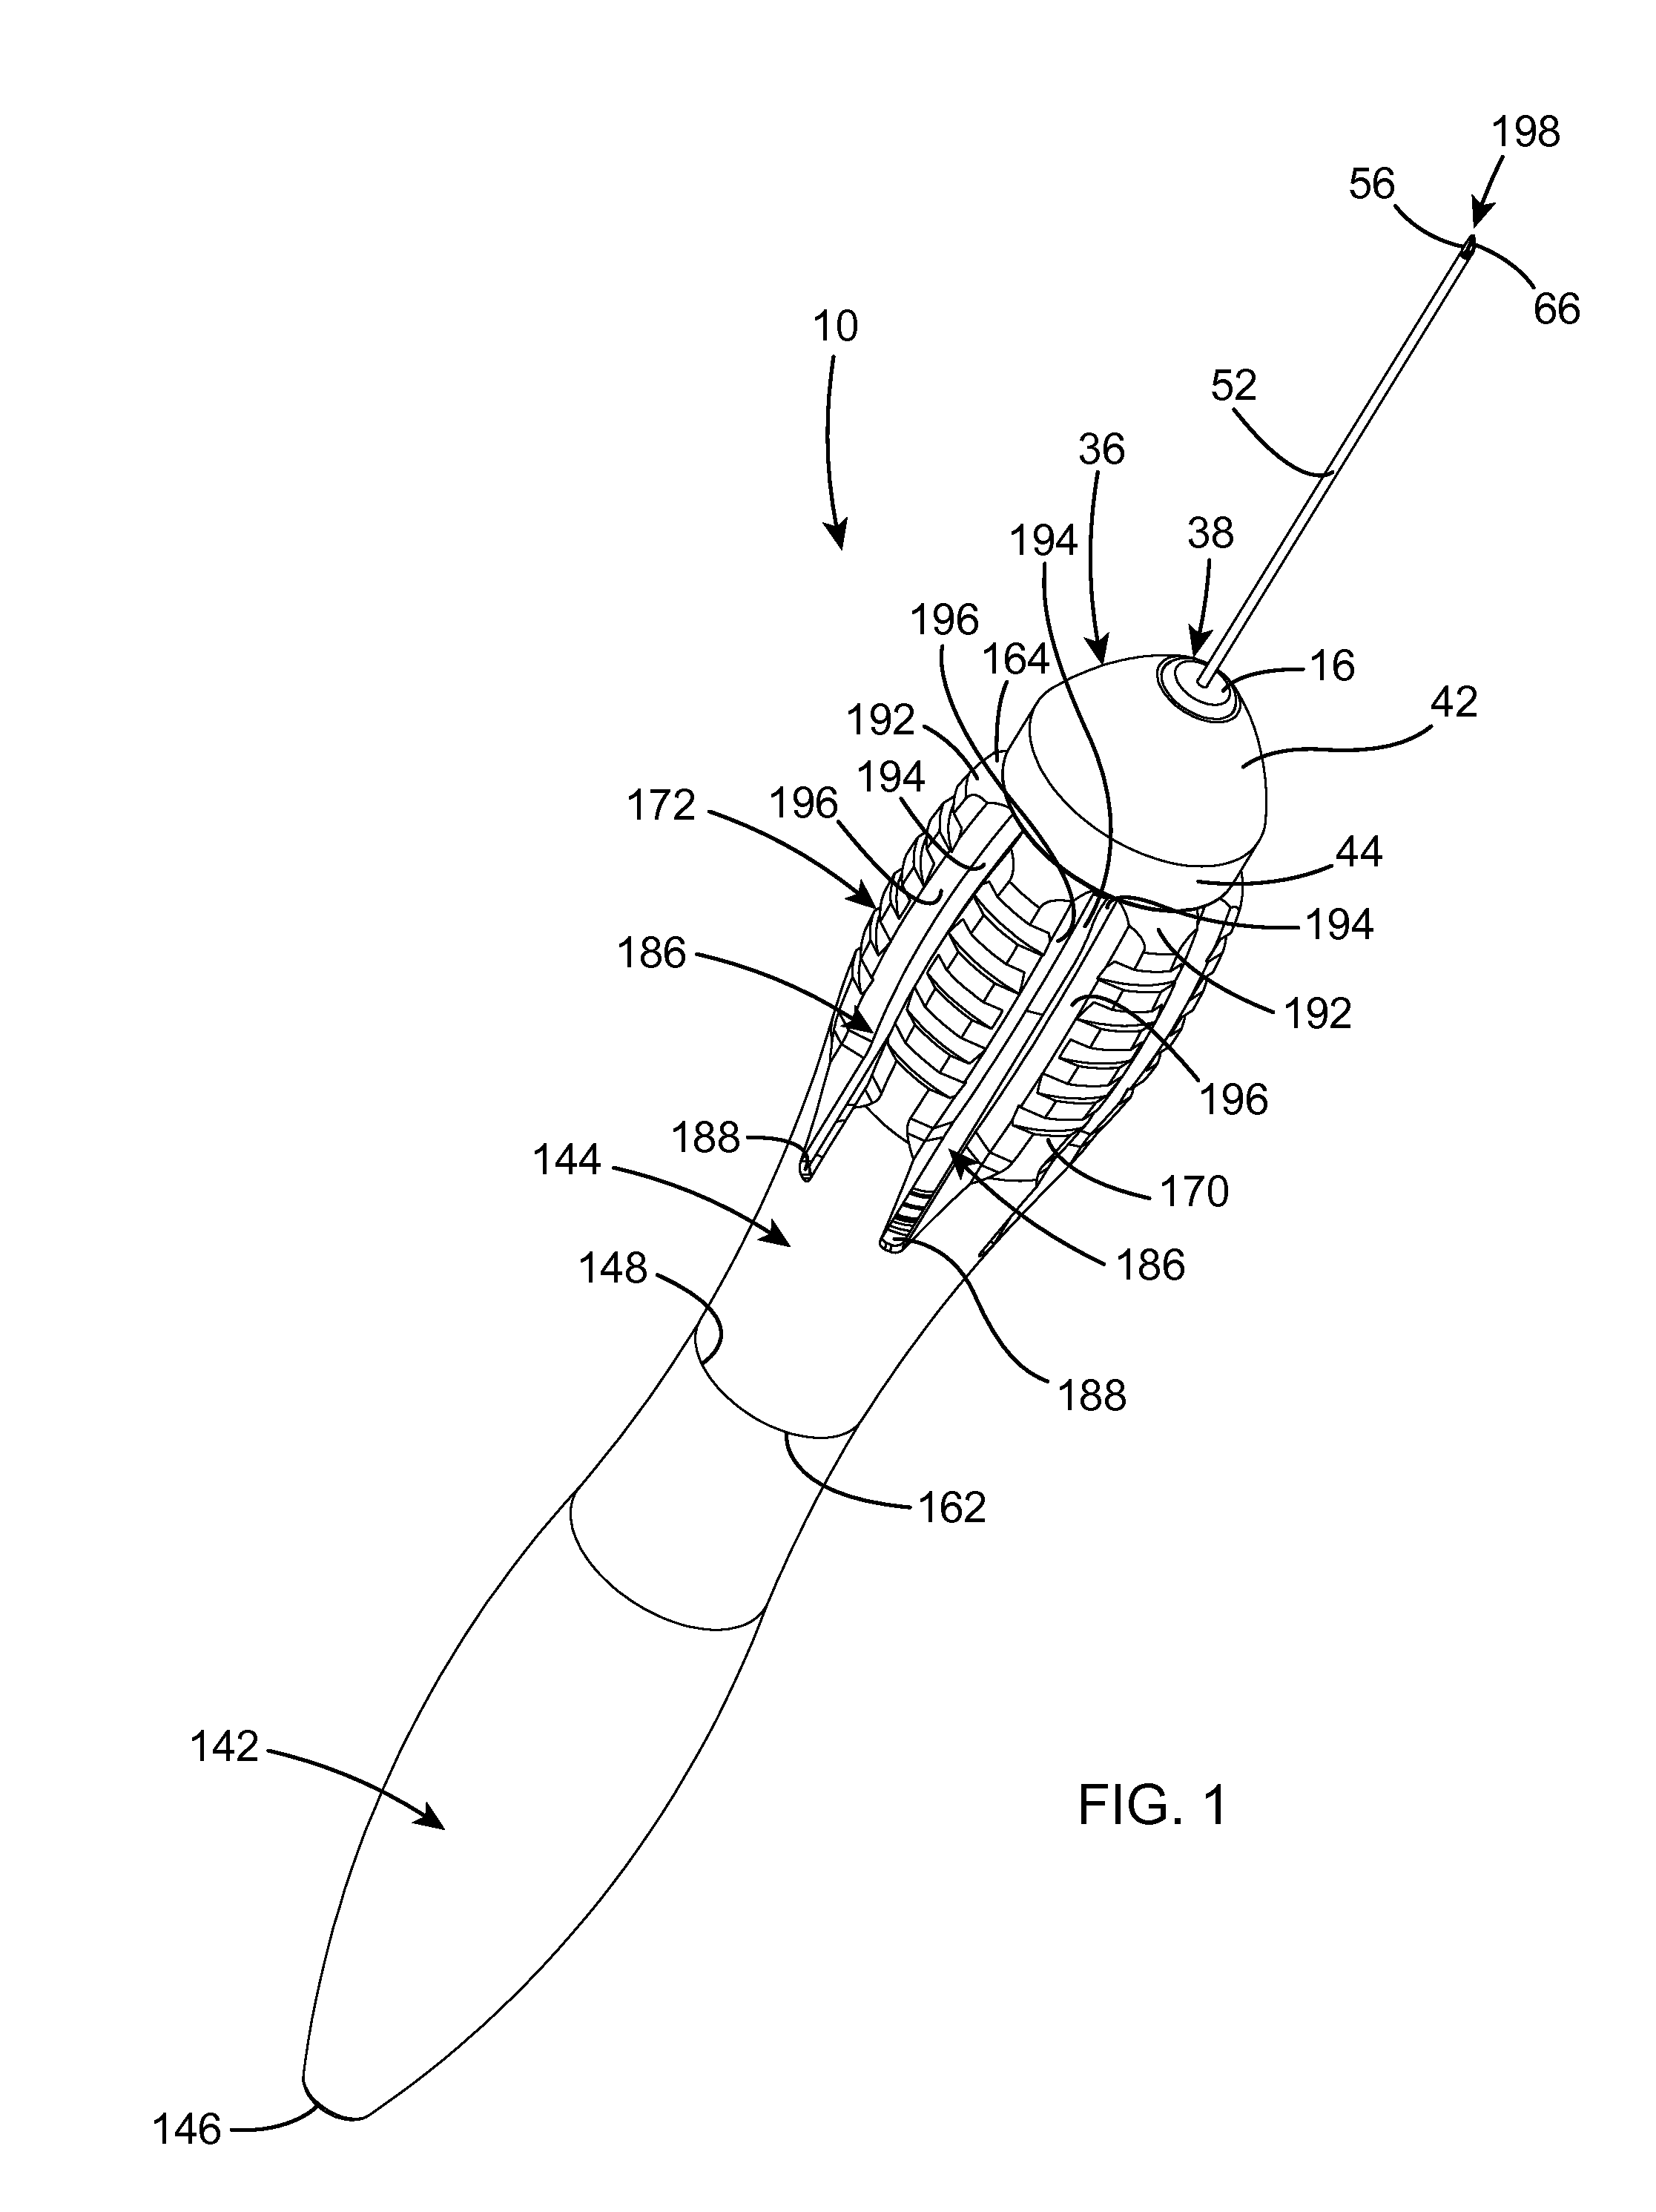 Axially Reciprocating Microsurgical Instrument with Radially Compressed Actuator Handle